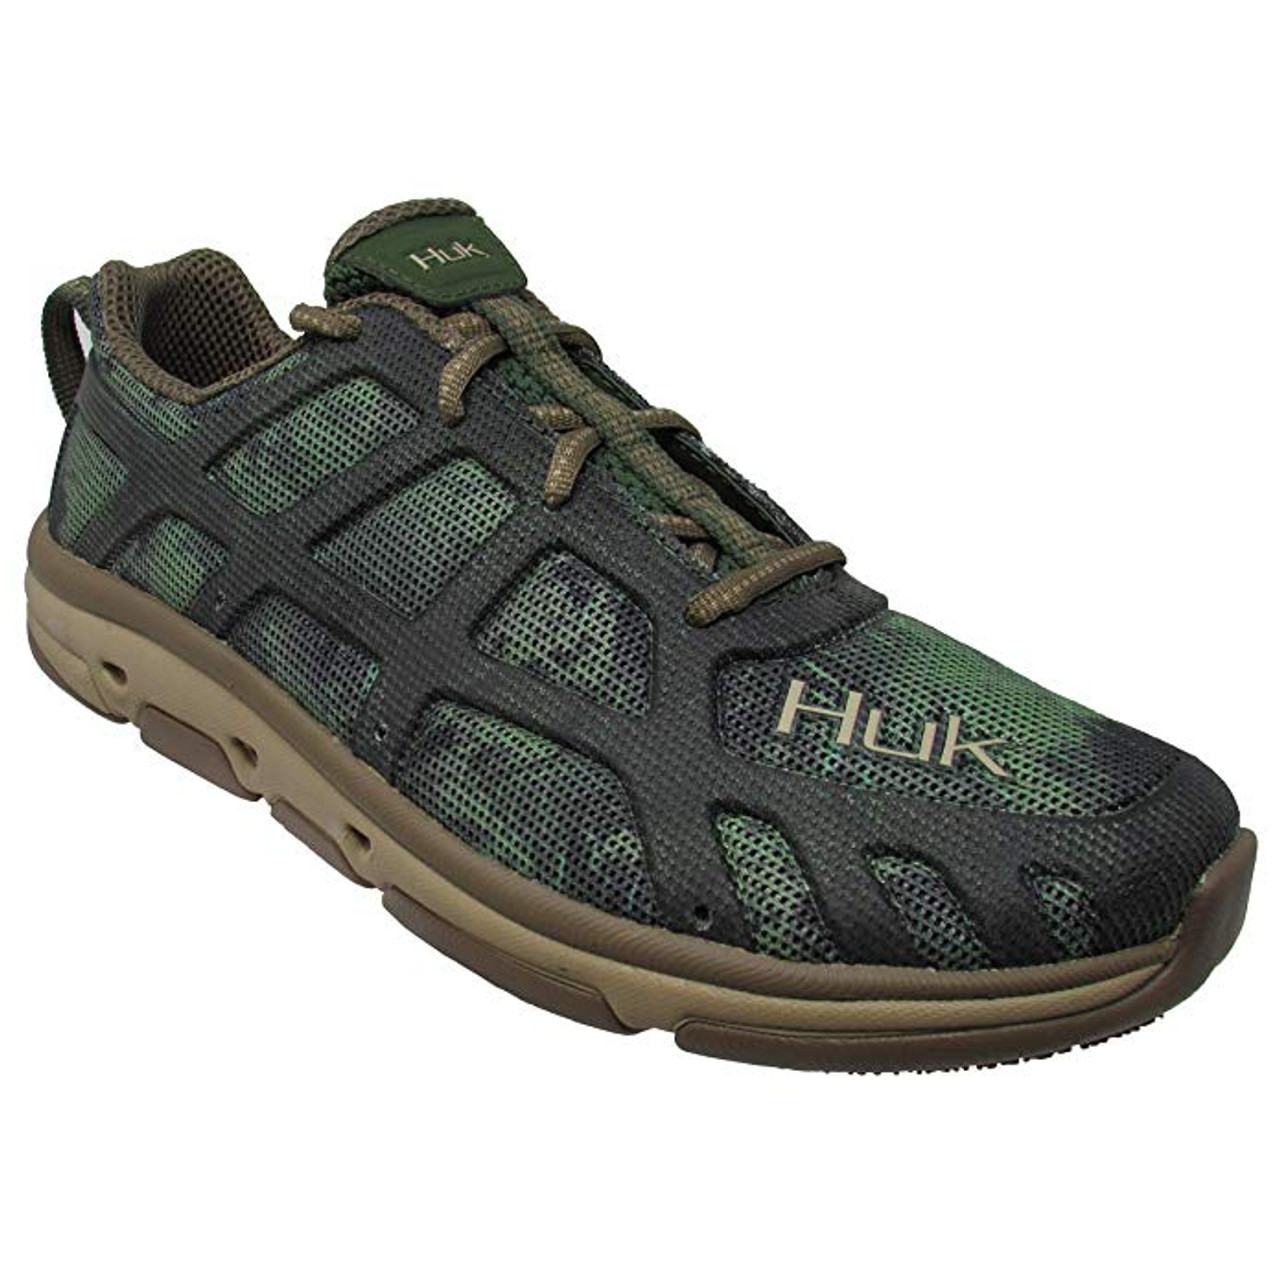 Huk Fishing Men's Huk Attack Shoes, Southern Tier, Size 9 - H8011000-385-9